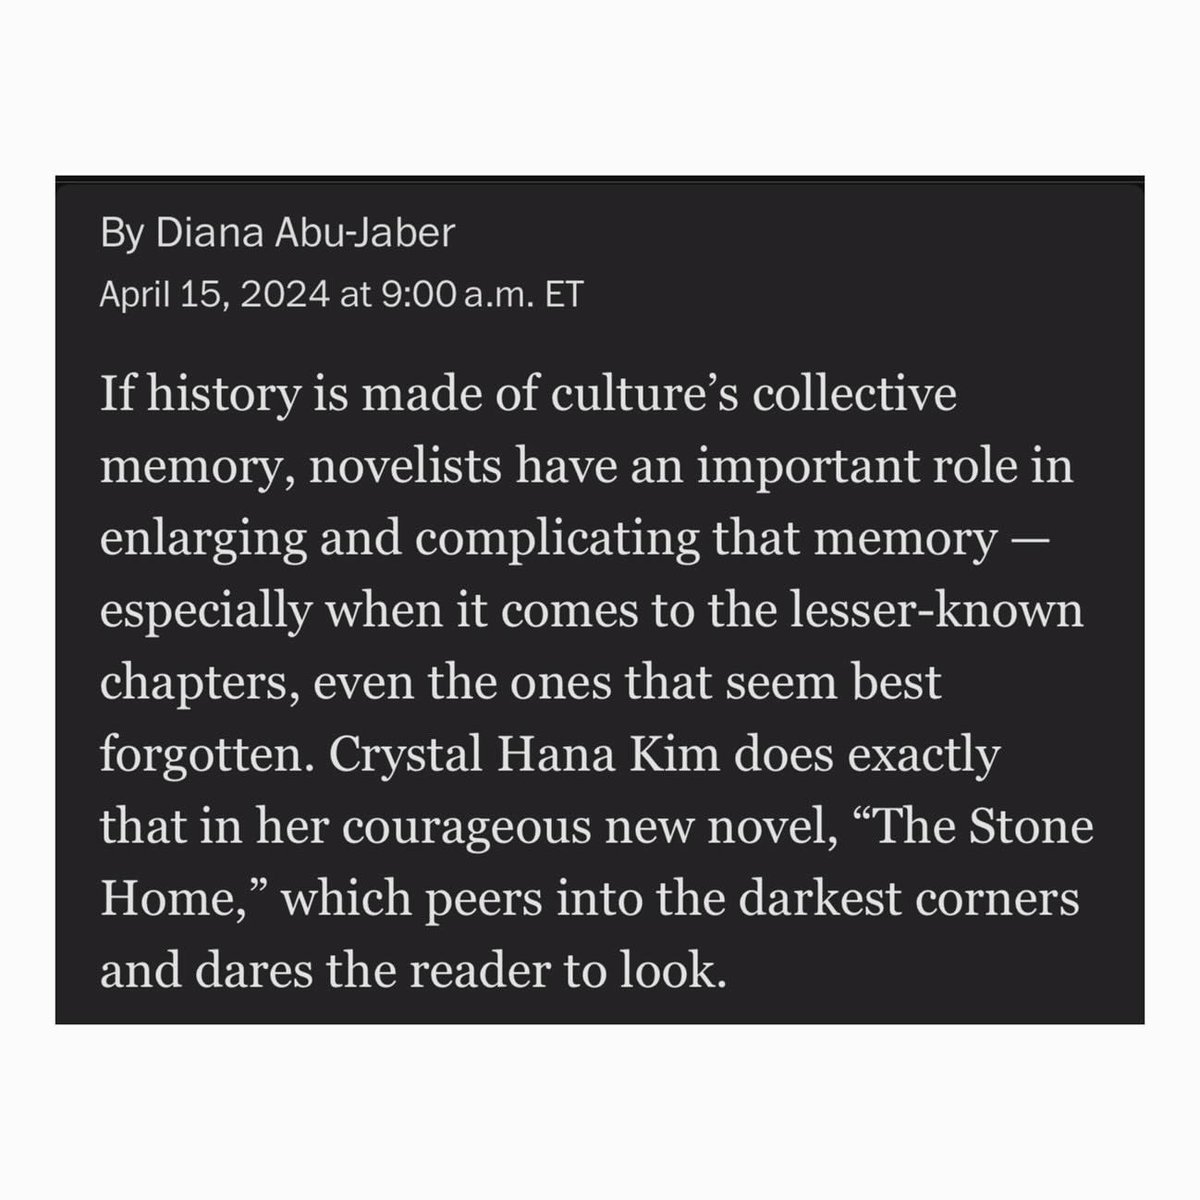 On my way to DC and thinking about my dream review in @washingtonpost. “If history is made of culture’s collective memory, novelists have an important role in enlarging and complicating that memory — especially when it comes to the lesser-known chapters, even the ones that seem